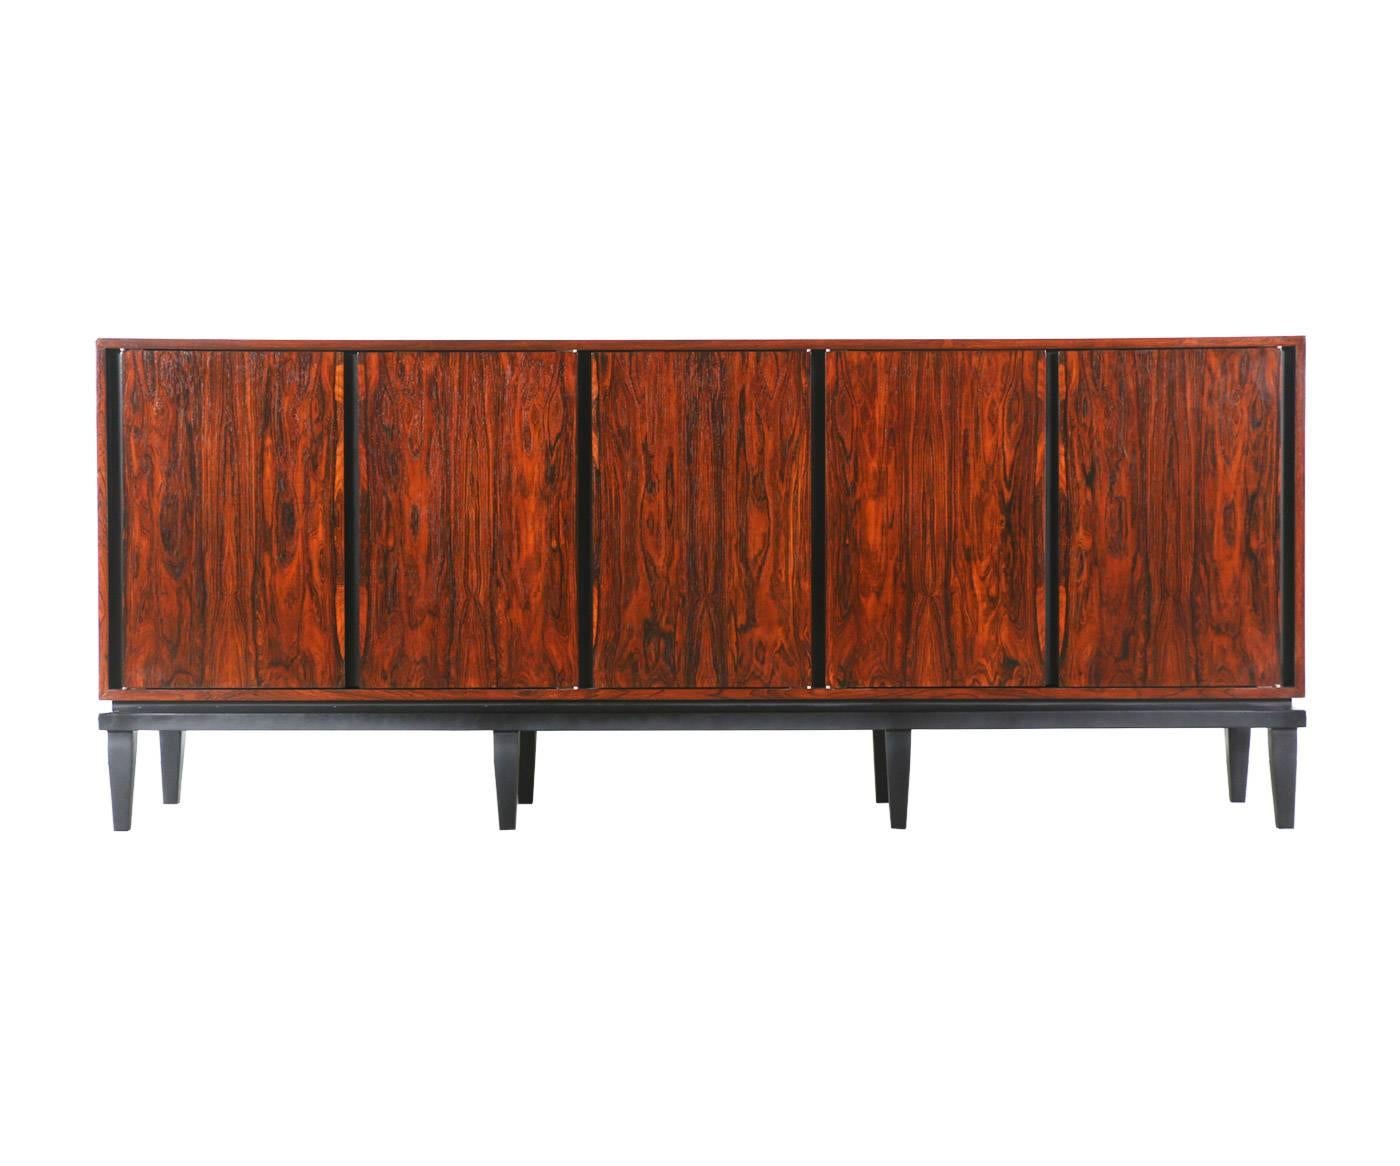 Designer: Unknown
Manufacturer: Unknown
Period/Style: Mid-Century Modern
Country: United States
Date: 1950s

Dimensions: 33?H x 80?L x 18?W
Materials: Rosewood, black satin
Condition: Excellent newly refinished
Number of items: One
ID number: 4627.